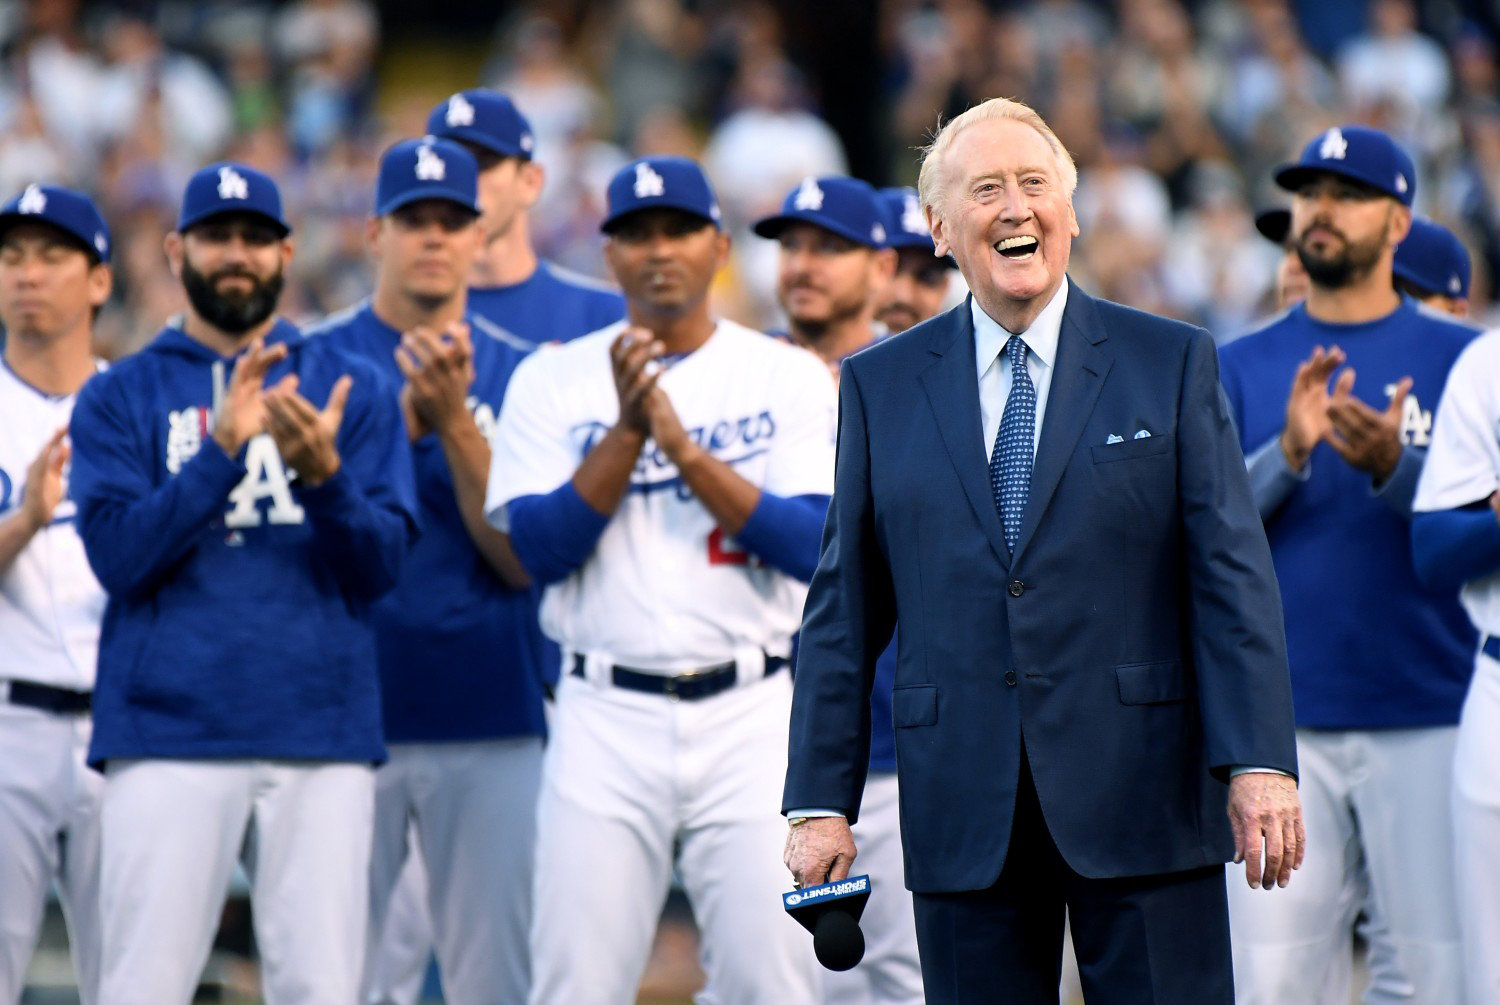 Vin Scully is all smiles as the former broadcaster is inducted into the Ring of Honor at Dodger Stadium Wednesday. (Wally Skalij/Los Angeles Times)